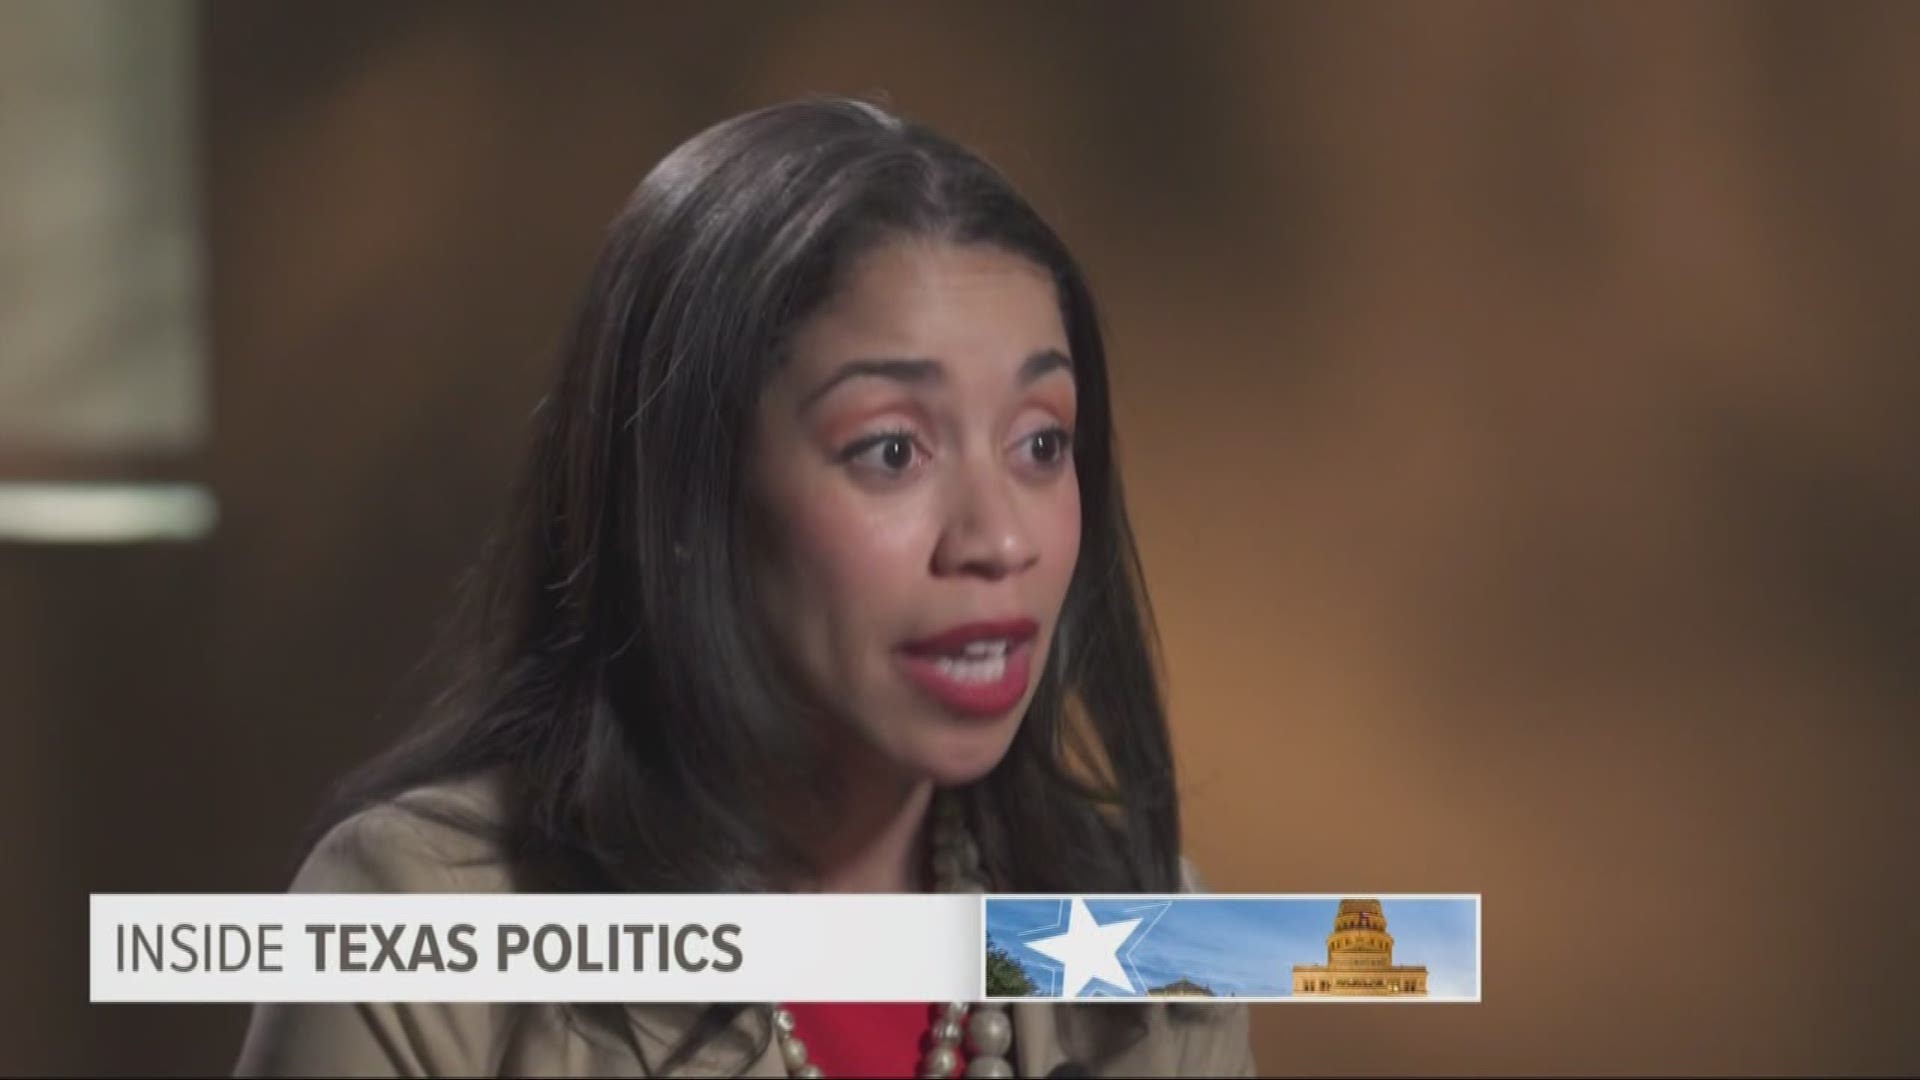 Houston City Councilwoman Amanda Edwards has served only one term as a council member-at-large. She is now one of the Democrats vying to unseat Republican U.S. Senator John Cornyn. Councilwoman Edwards sat down for an interview with host Jason Whitely during a recent trip to Frisco, Texas.